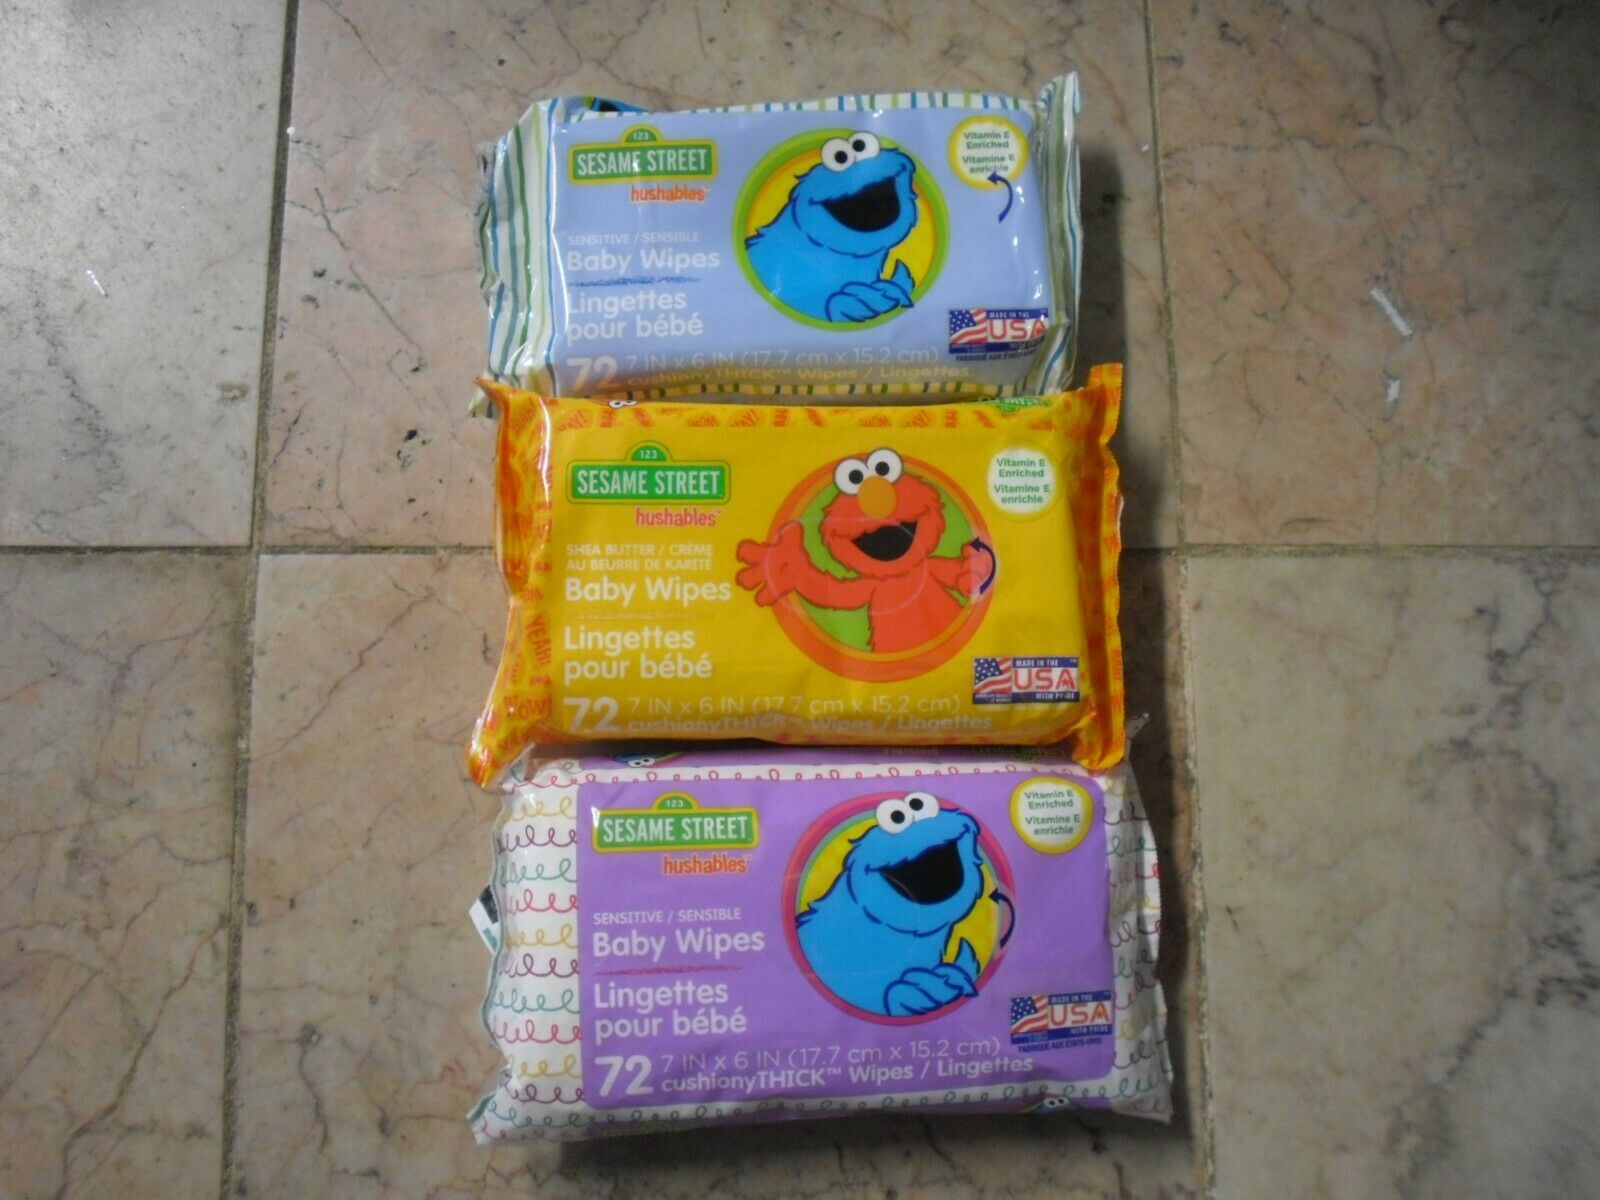 New !  Hushables Sesame Street Sensitive Baby Wipes Elmo Cookie Monster 72 count